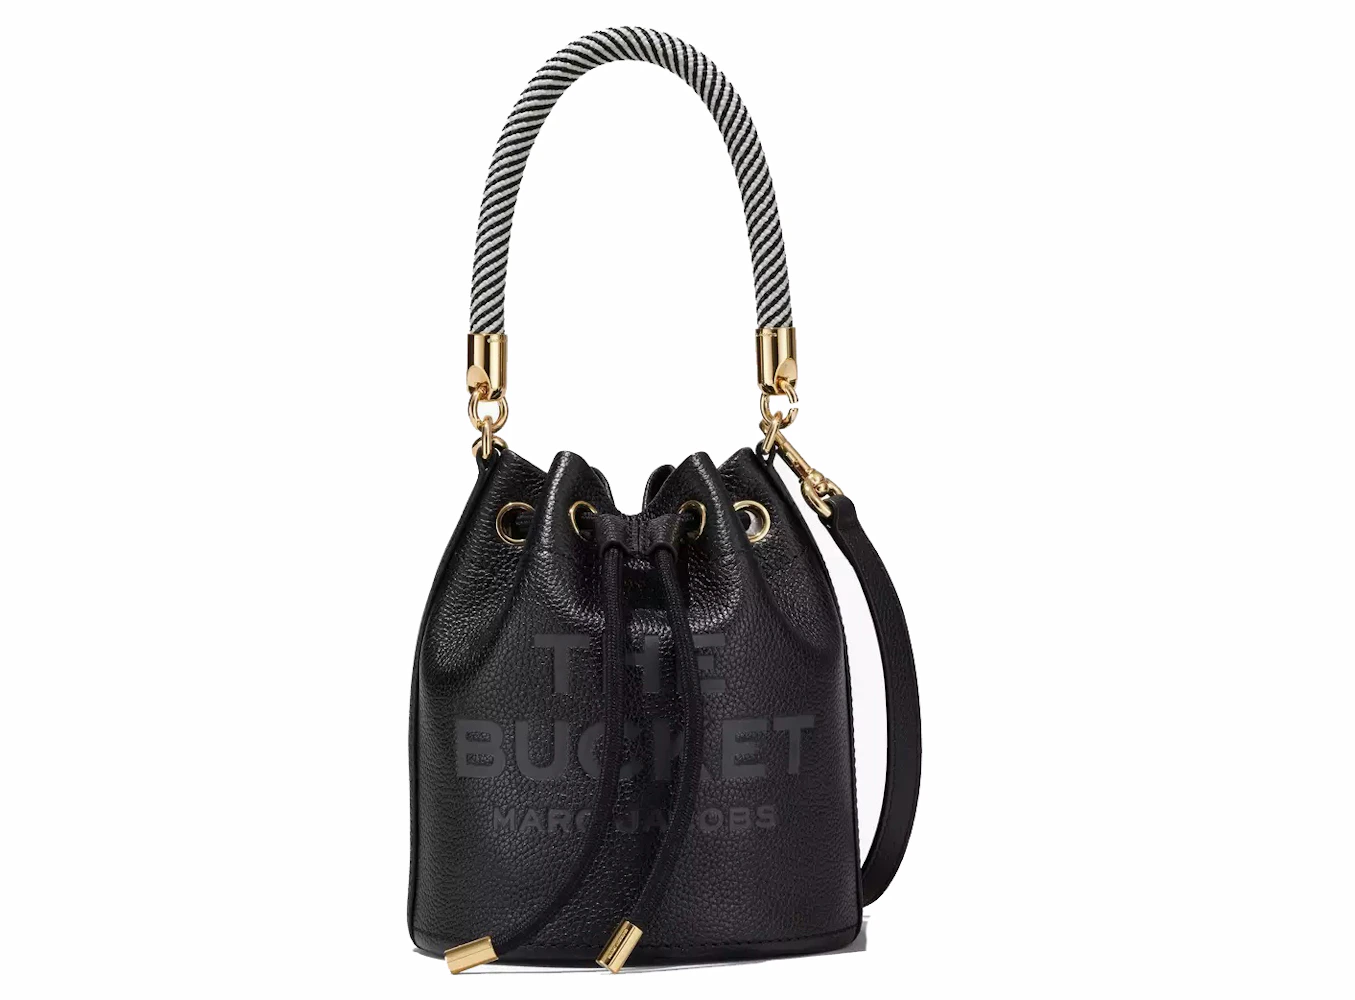 Marc Jacobs The Leather Bucket Bag in Black